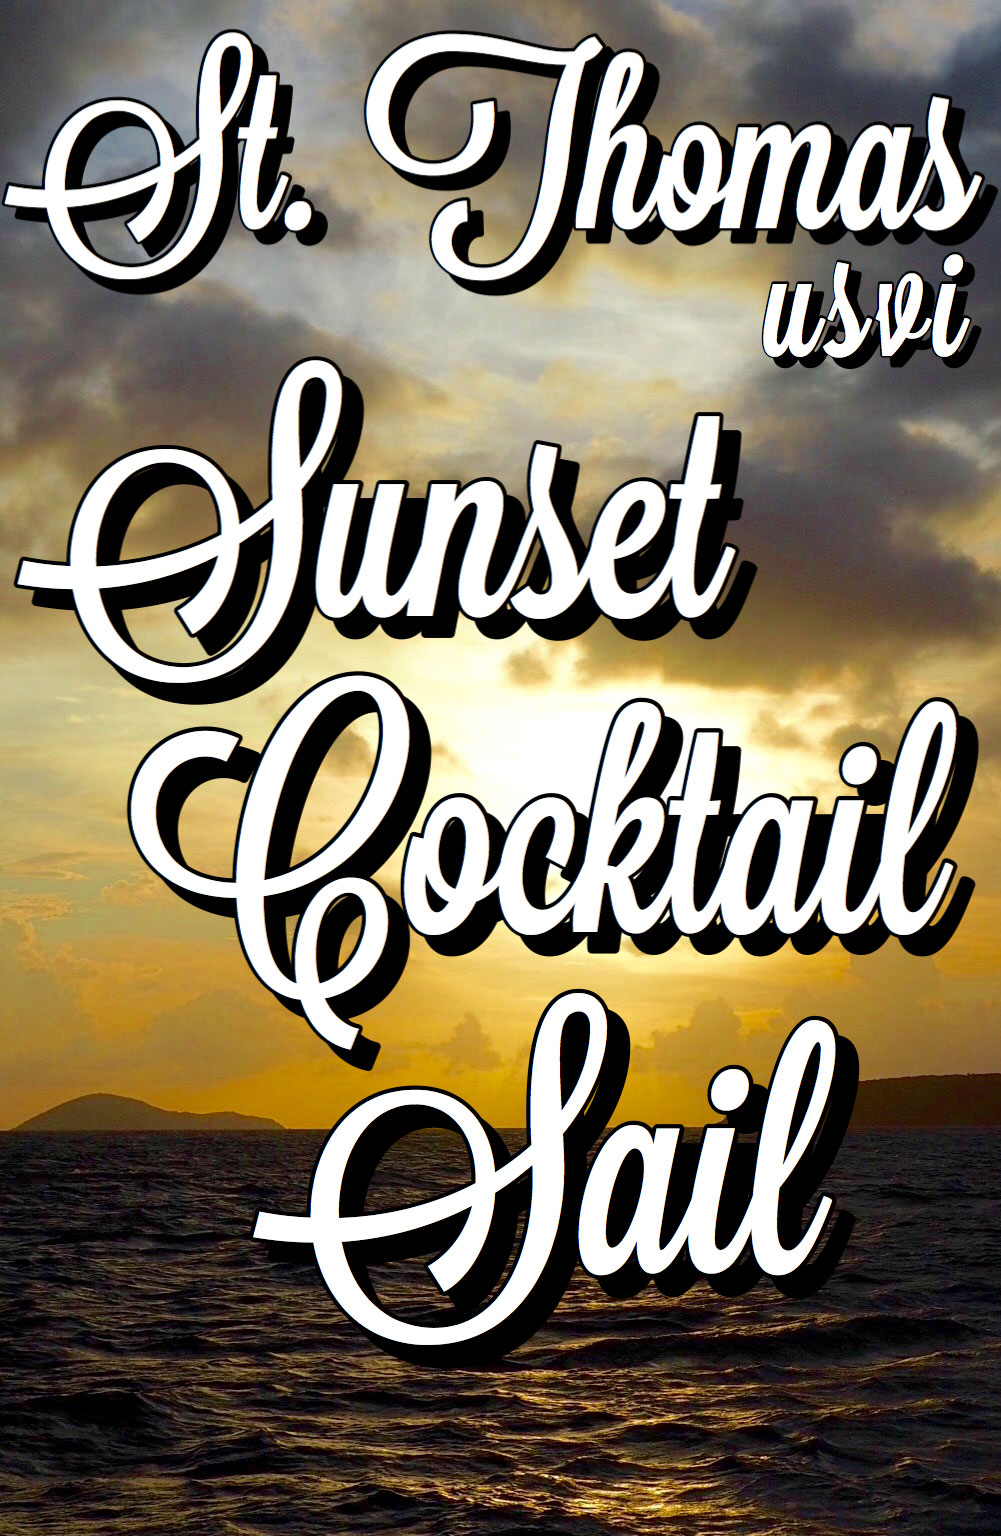 A Local's Guide to St. Thomas: Sunset Cocktail Sail